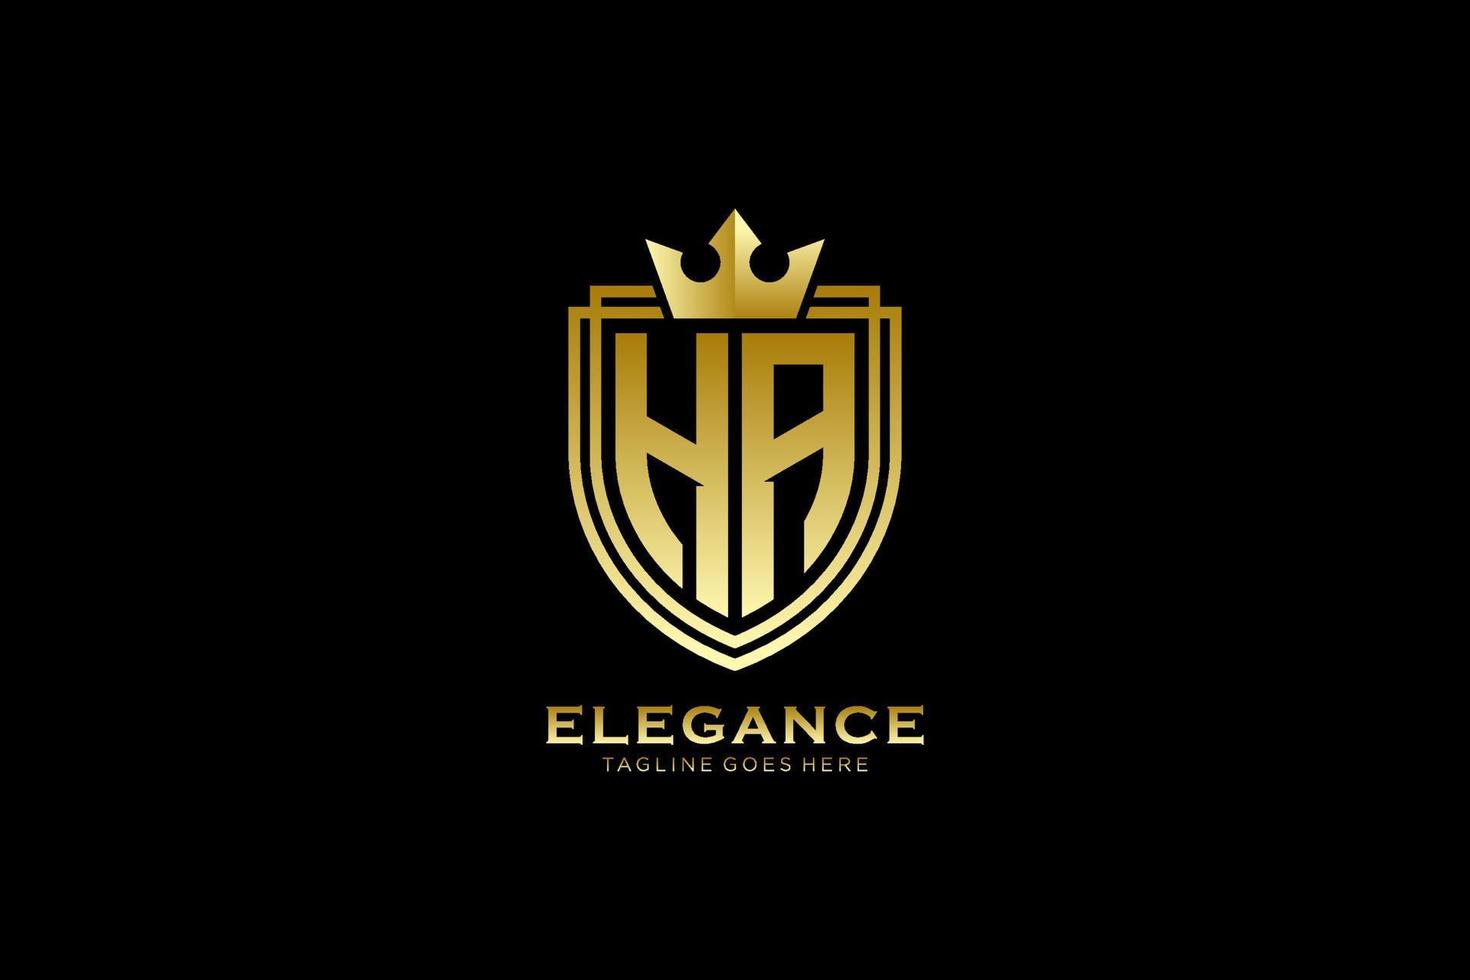 initial HA elegant luxury monogram logo or badge template with scrolls and royal crown - perfect for luxurious branding projects vector